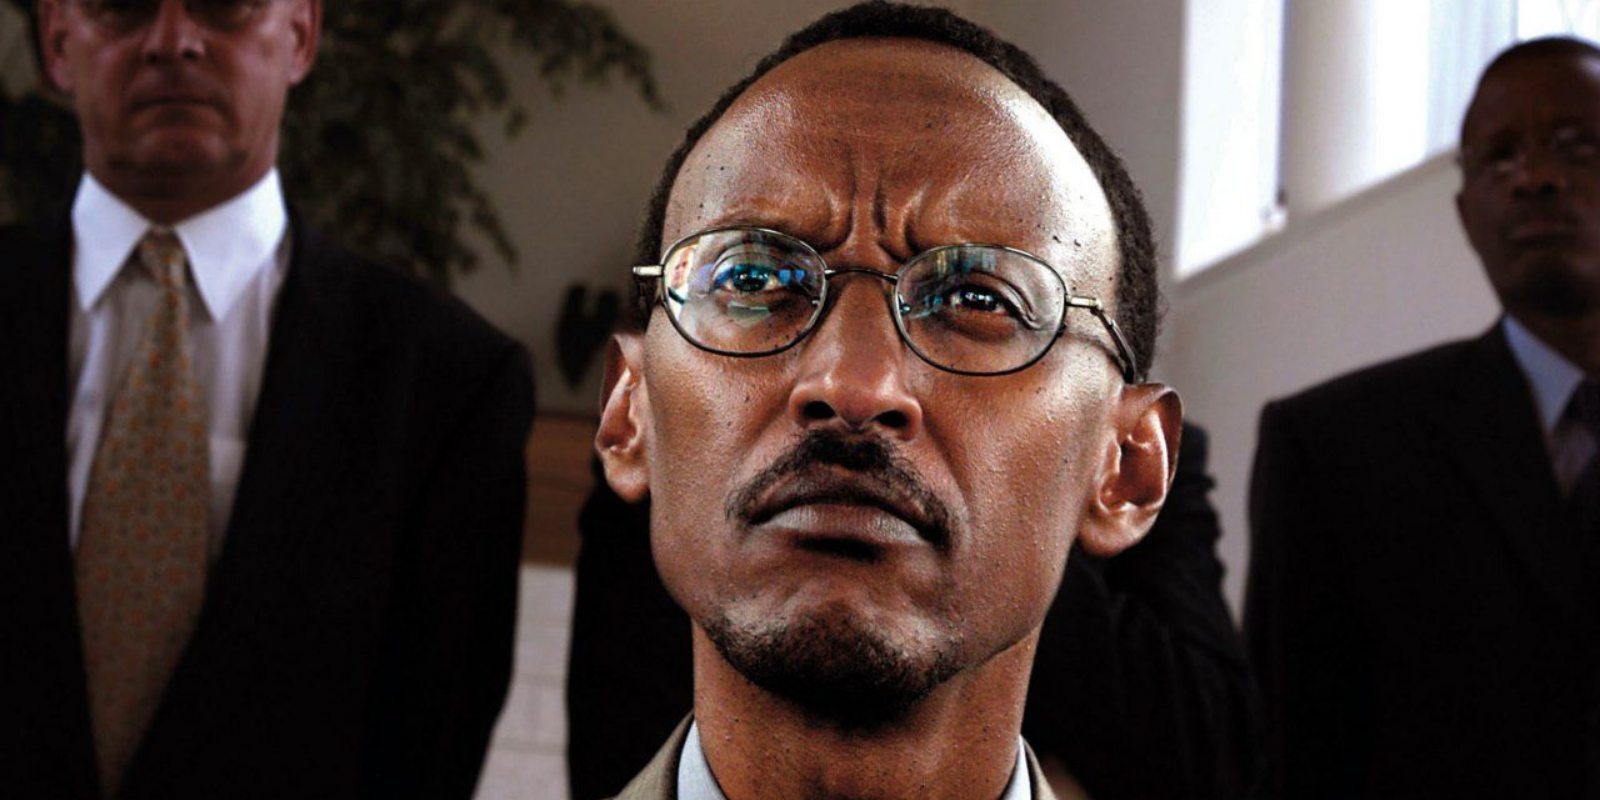 Paul Kagame is the president of which country?